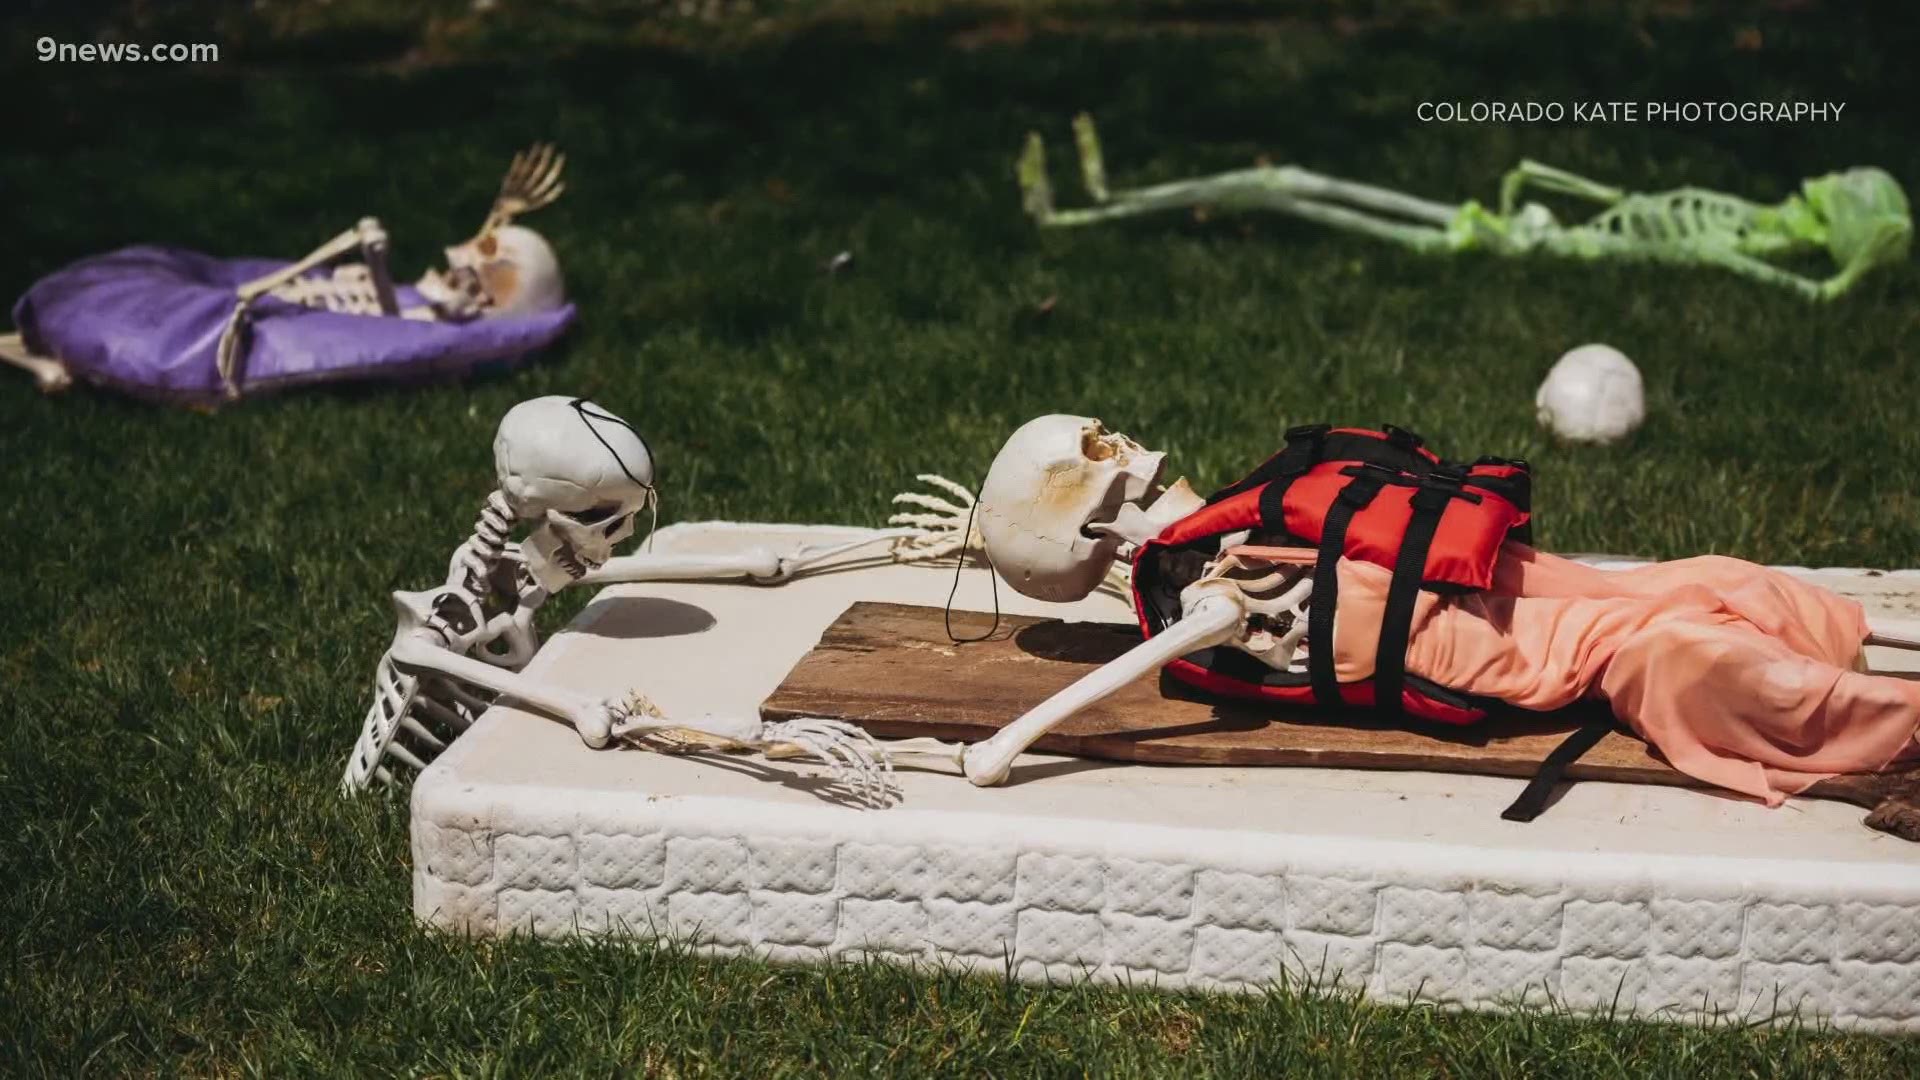 For the past month, Kate Davis and her family have re-positioned the skeletons in her front yard nearly every day to mimic scenes in pop culture.